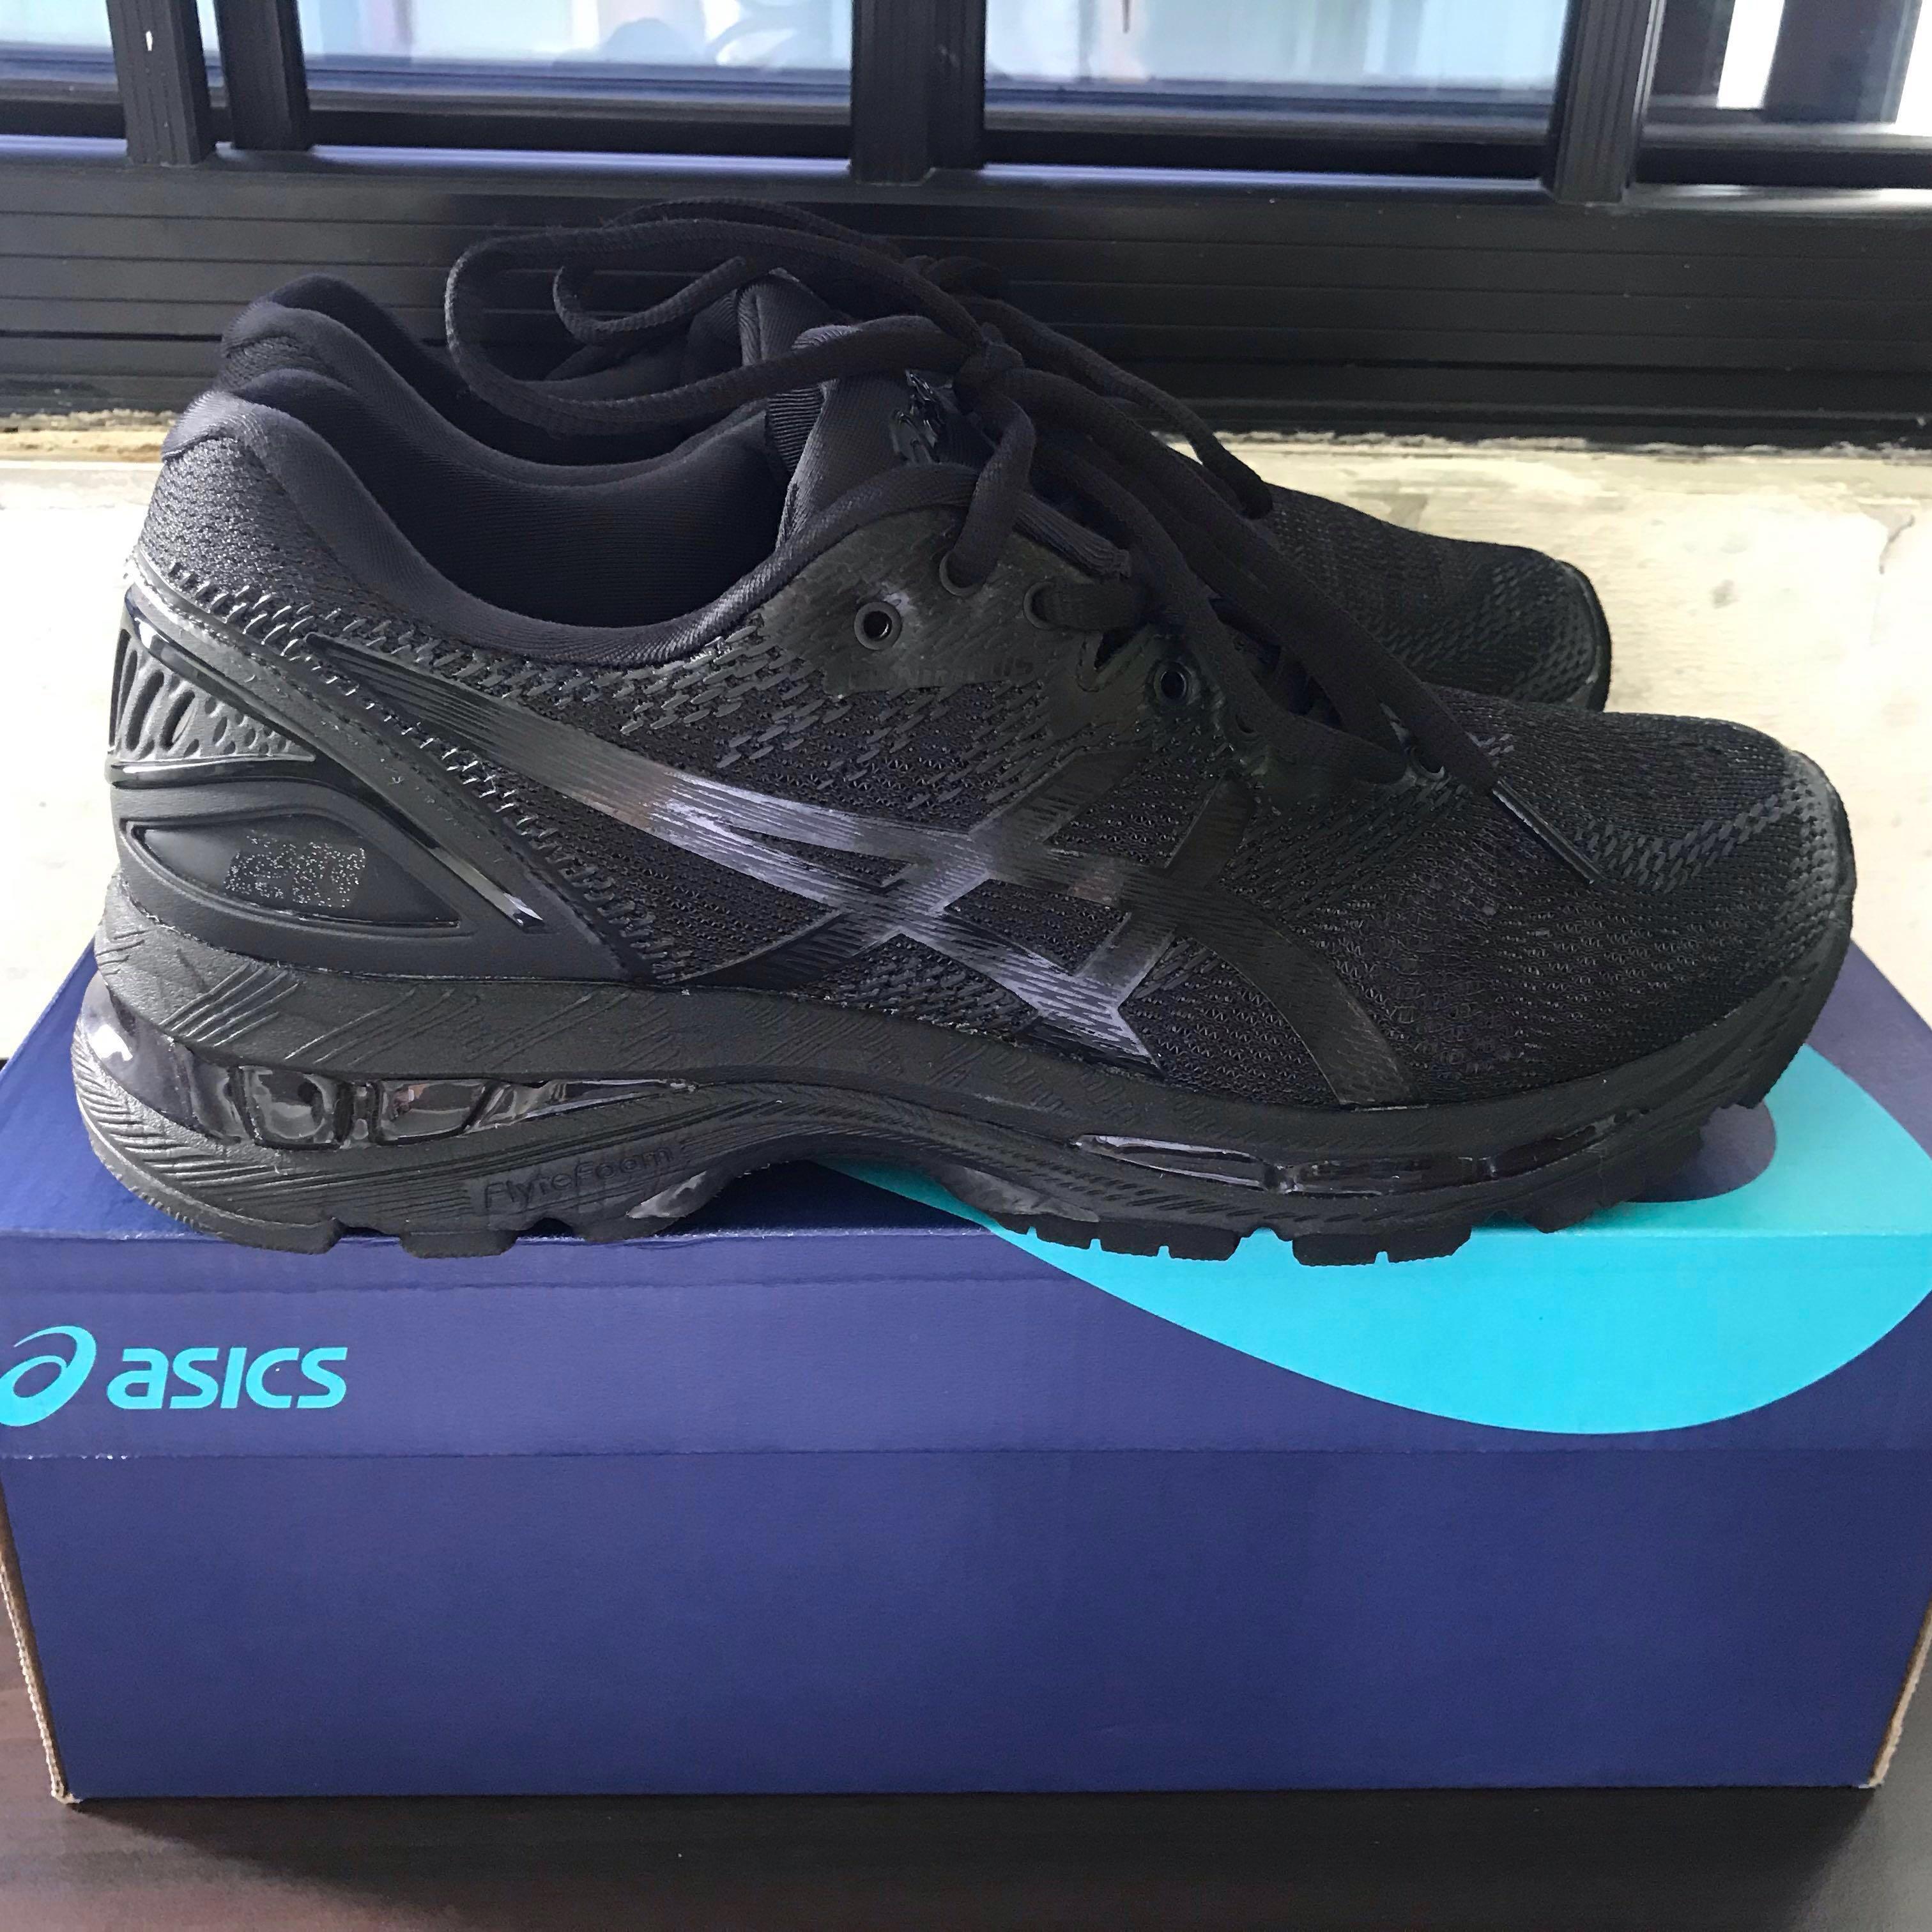 all black asics running shoes,Free 